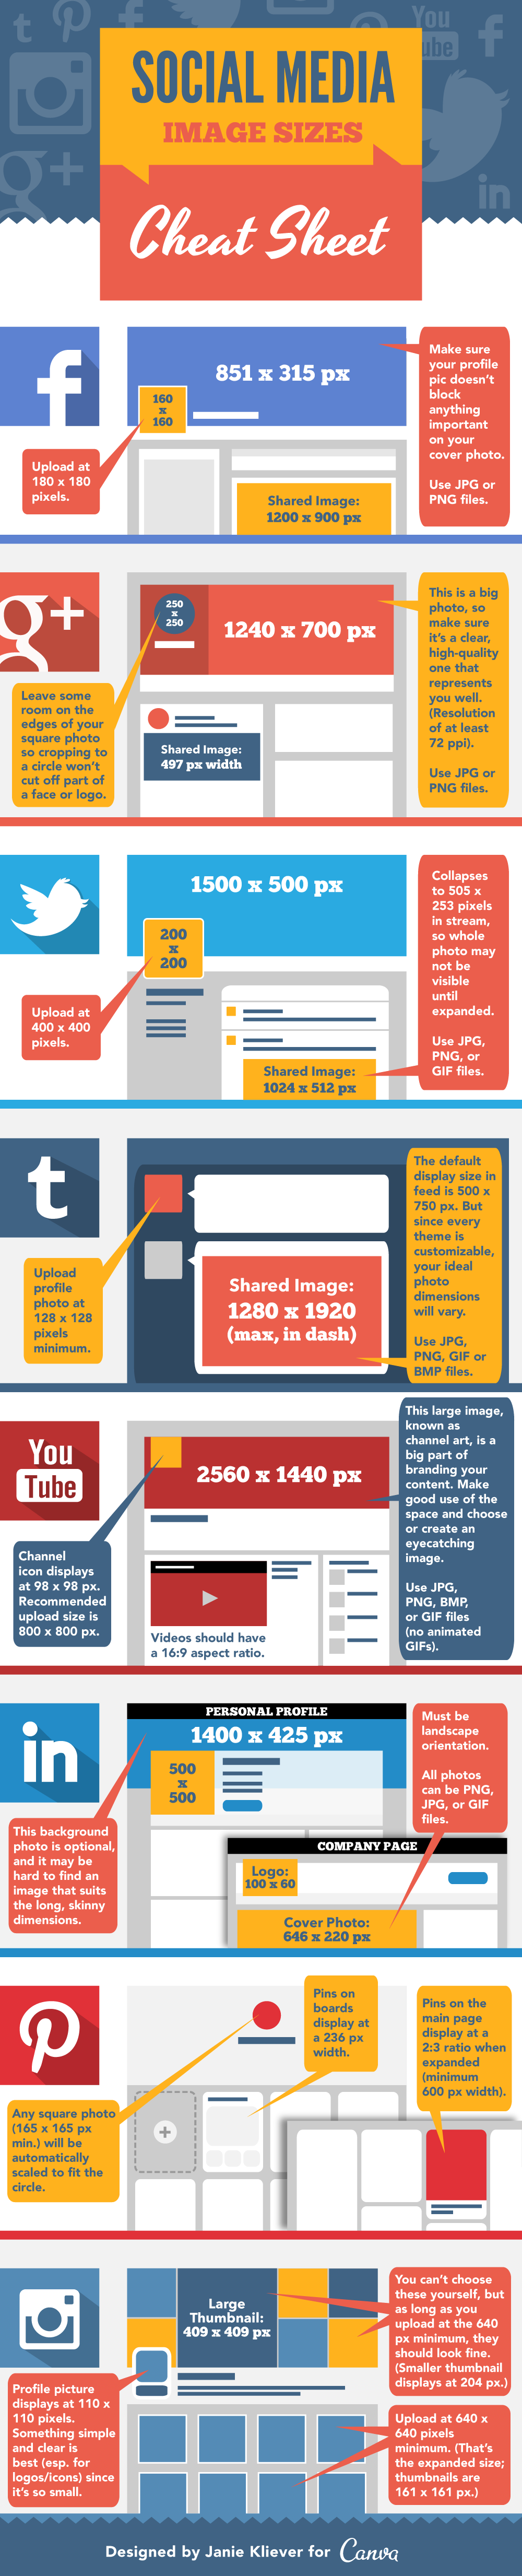 The Complete Social Media Image Size Guide